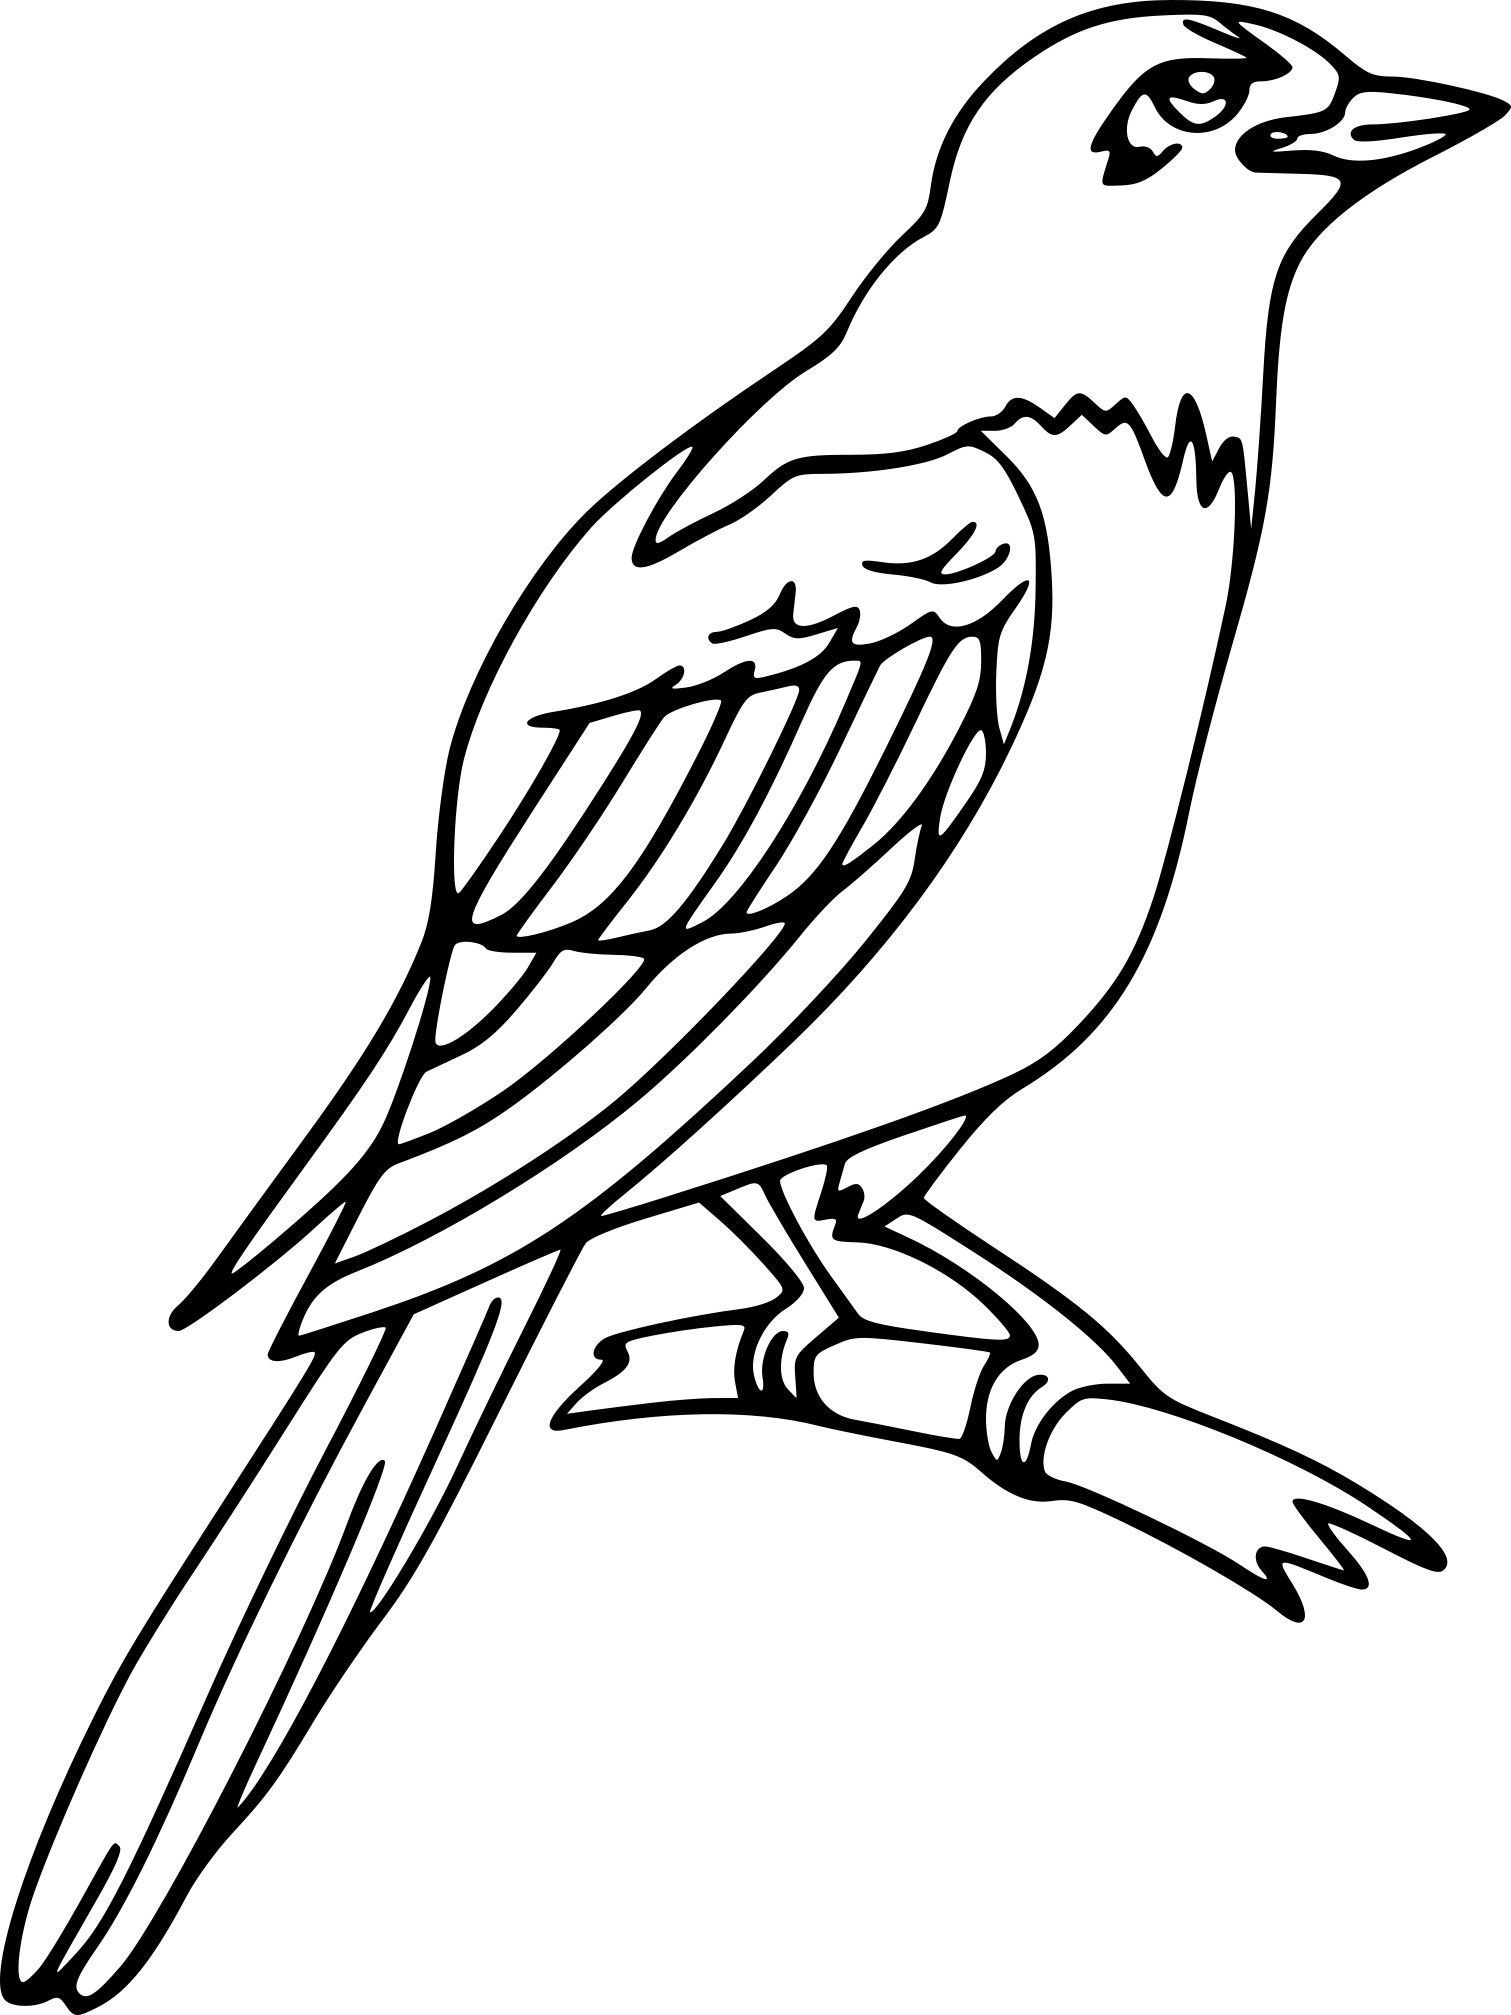 Magpie coloring page